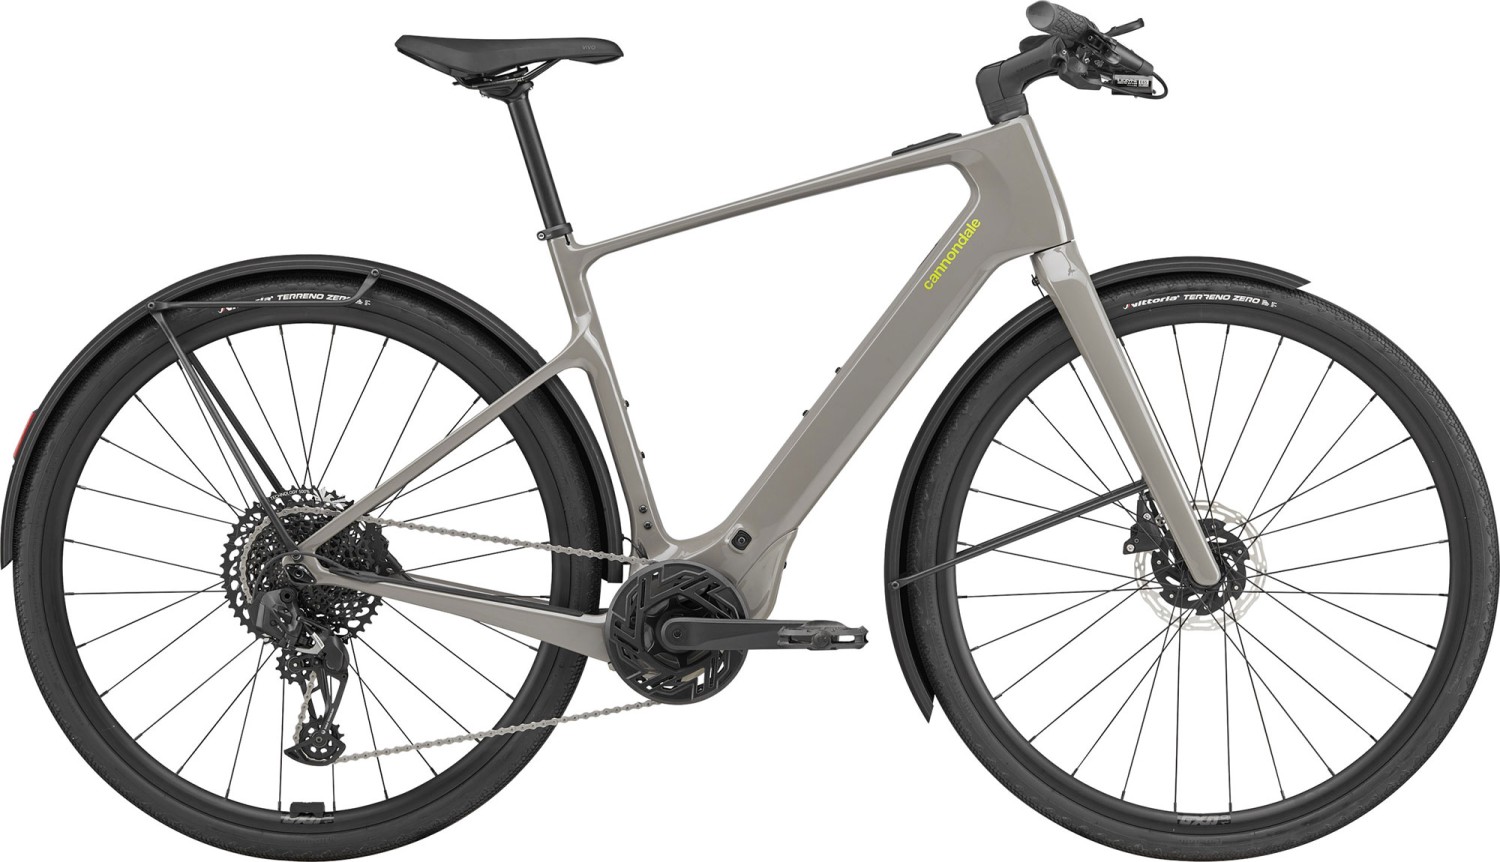 CANNONDALE TESORO NEO CARBON 1 - M SGY